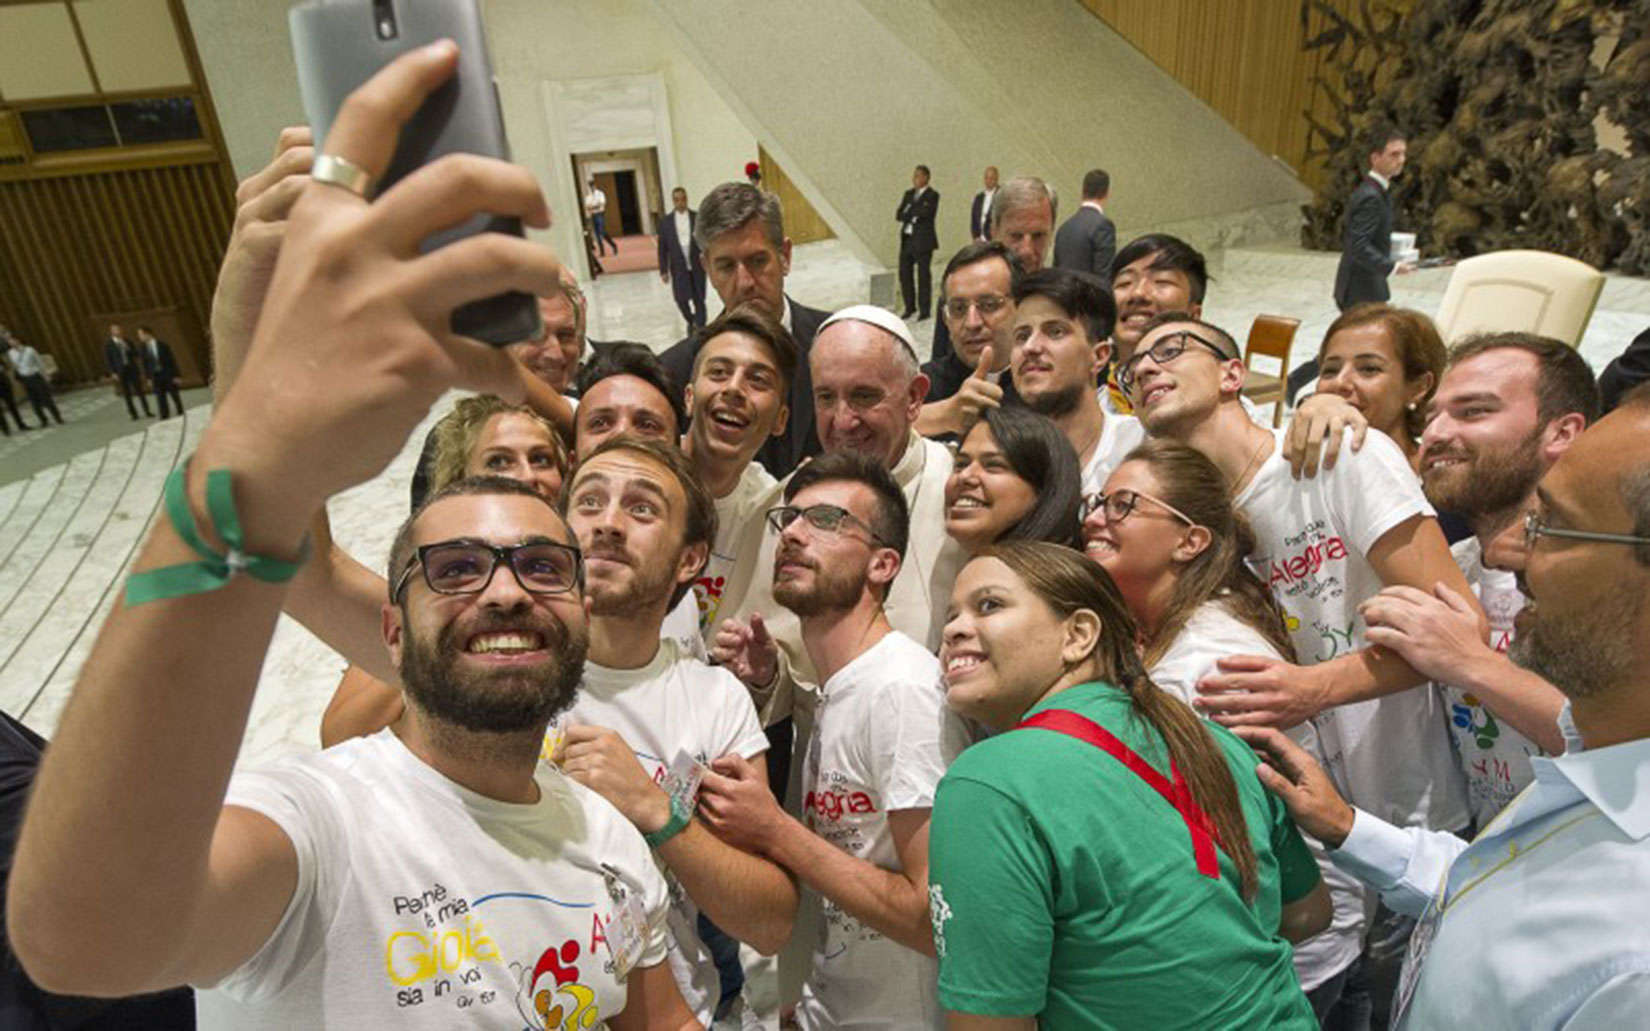 Pope Francis welcomes the presence of smartphones - but not at dinner.